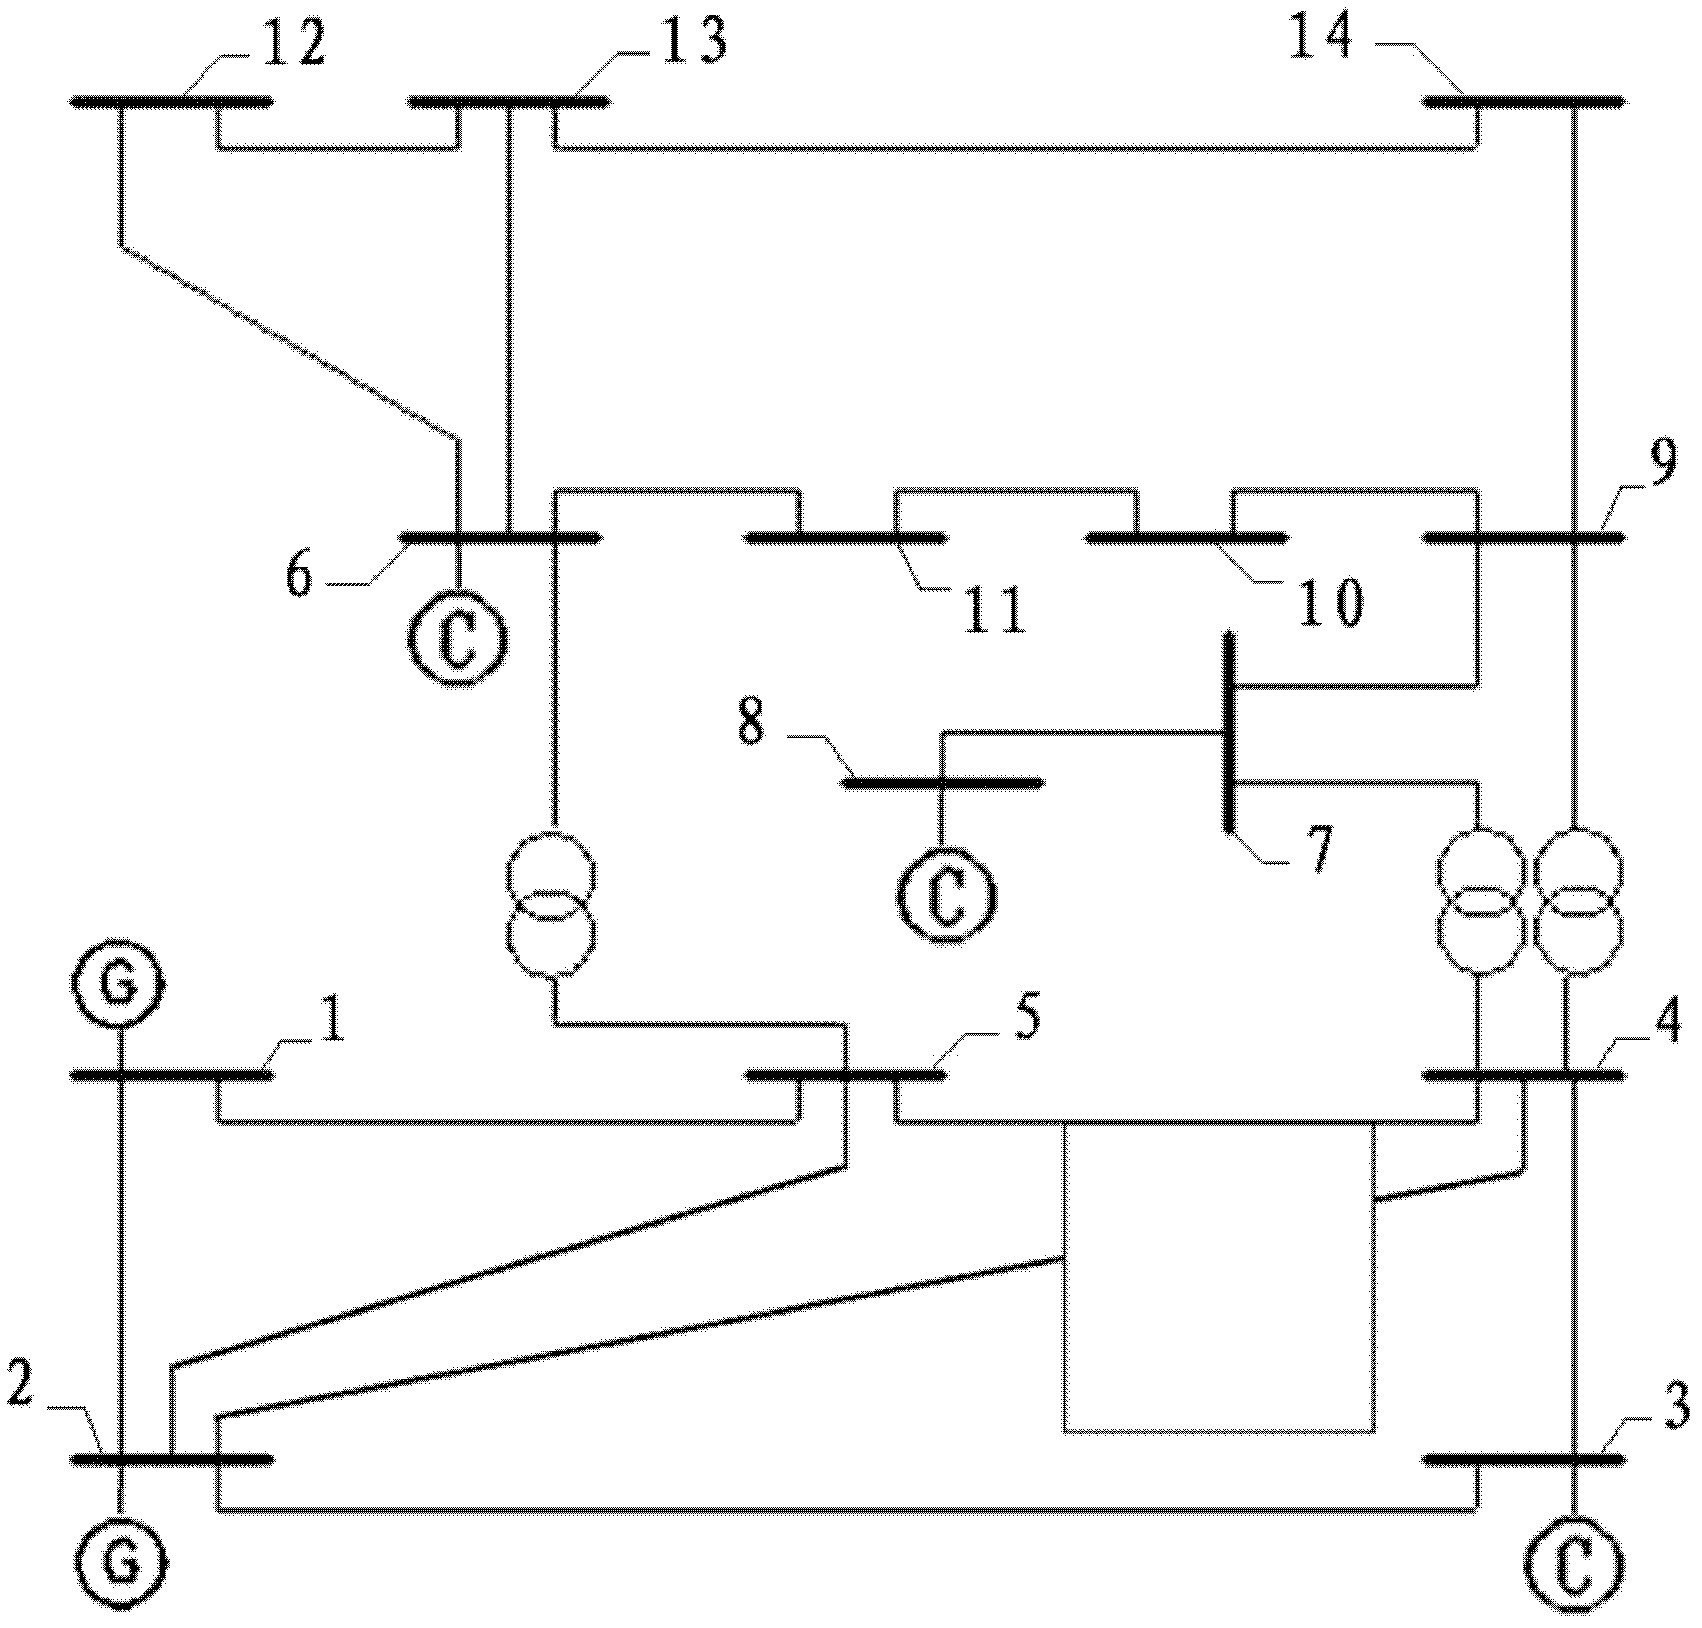 Multi-target reactive power optimization method for electric system